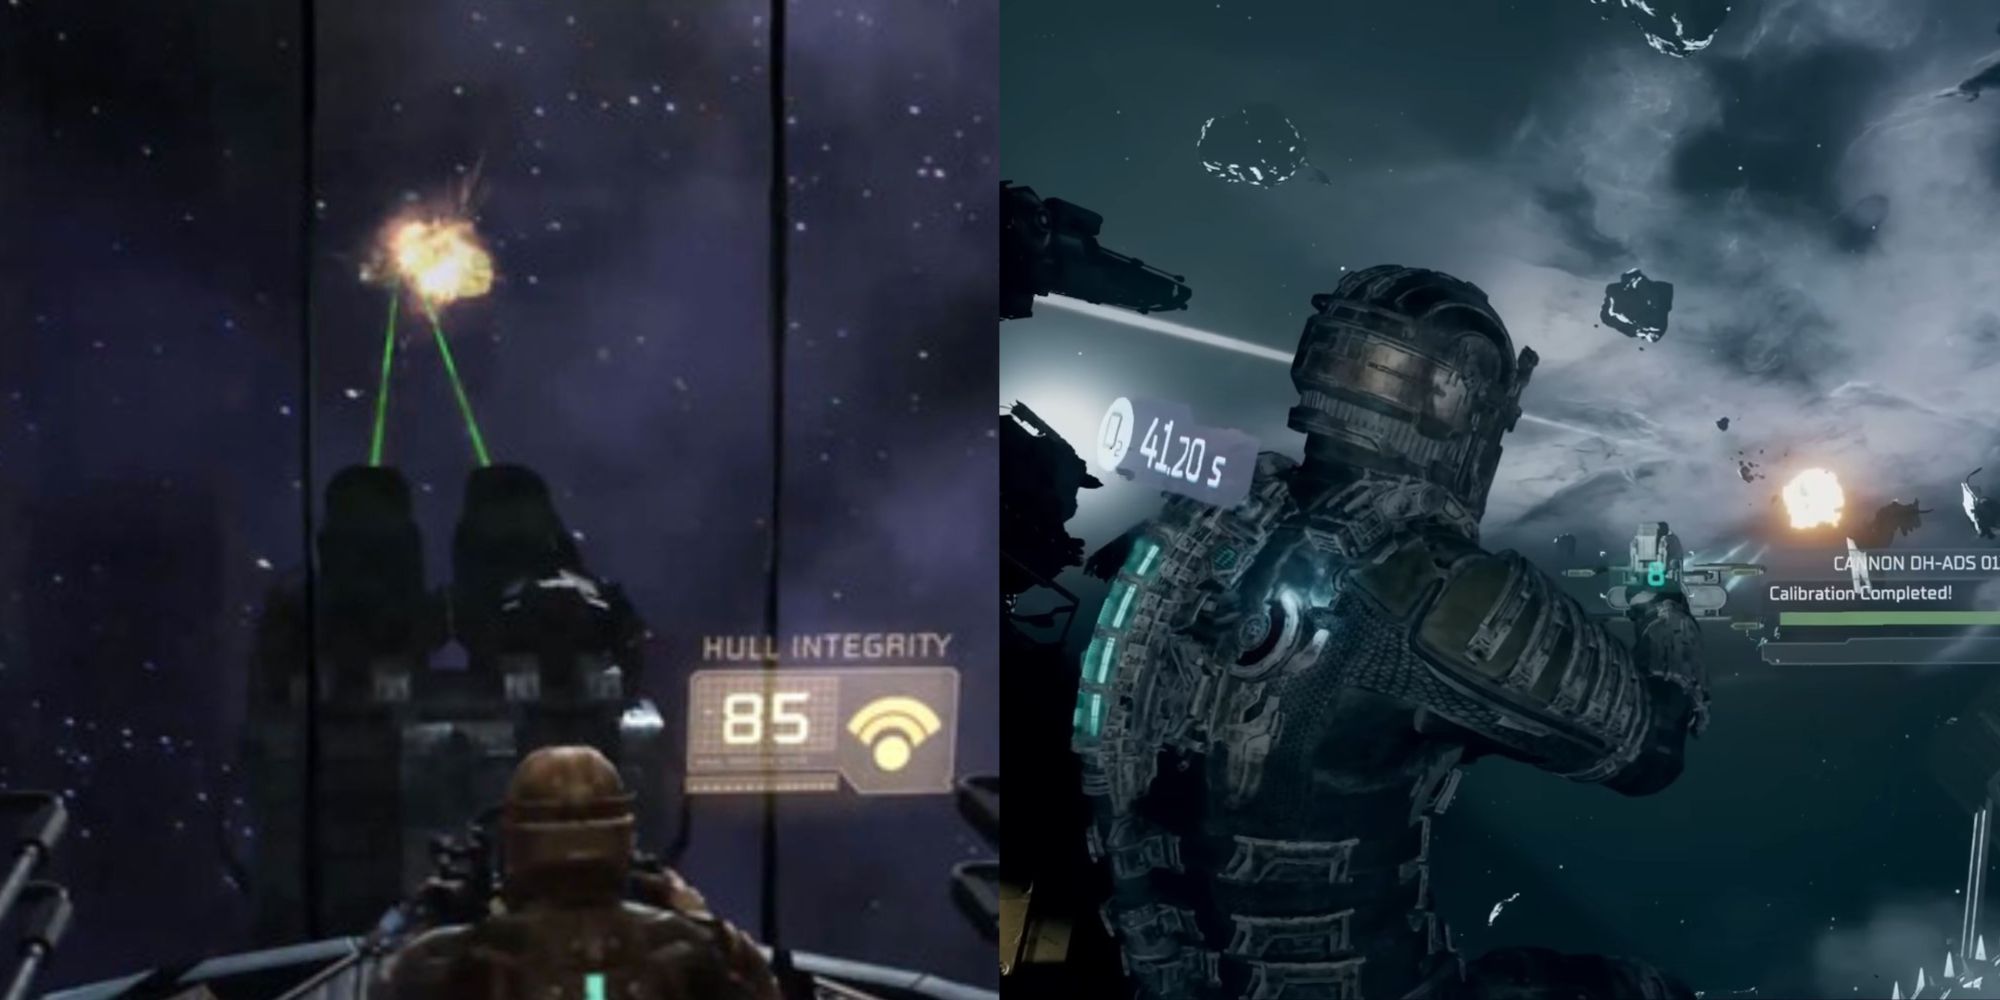 The asteroid shooting segment in both the original Dead Space and its remake.